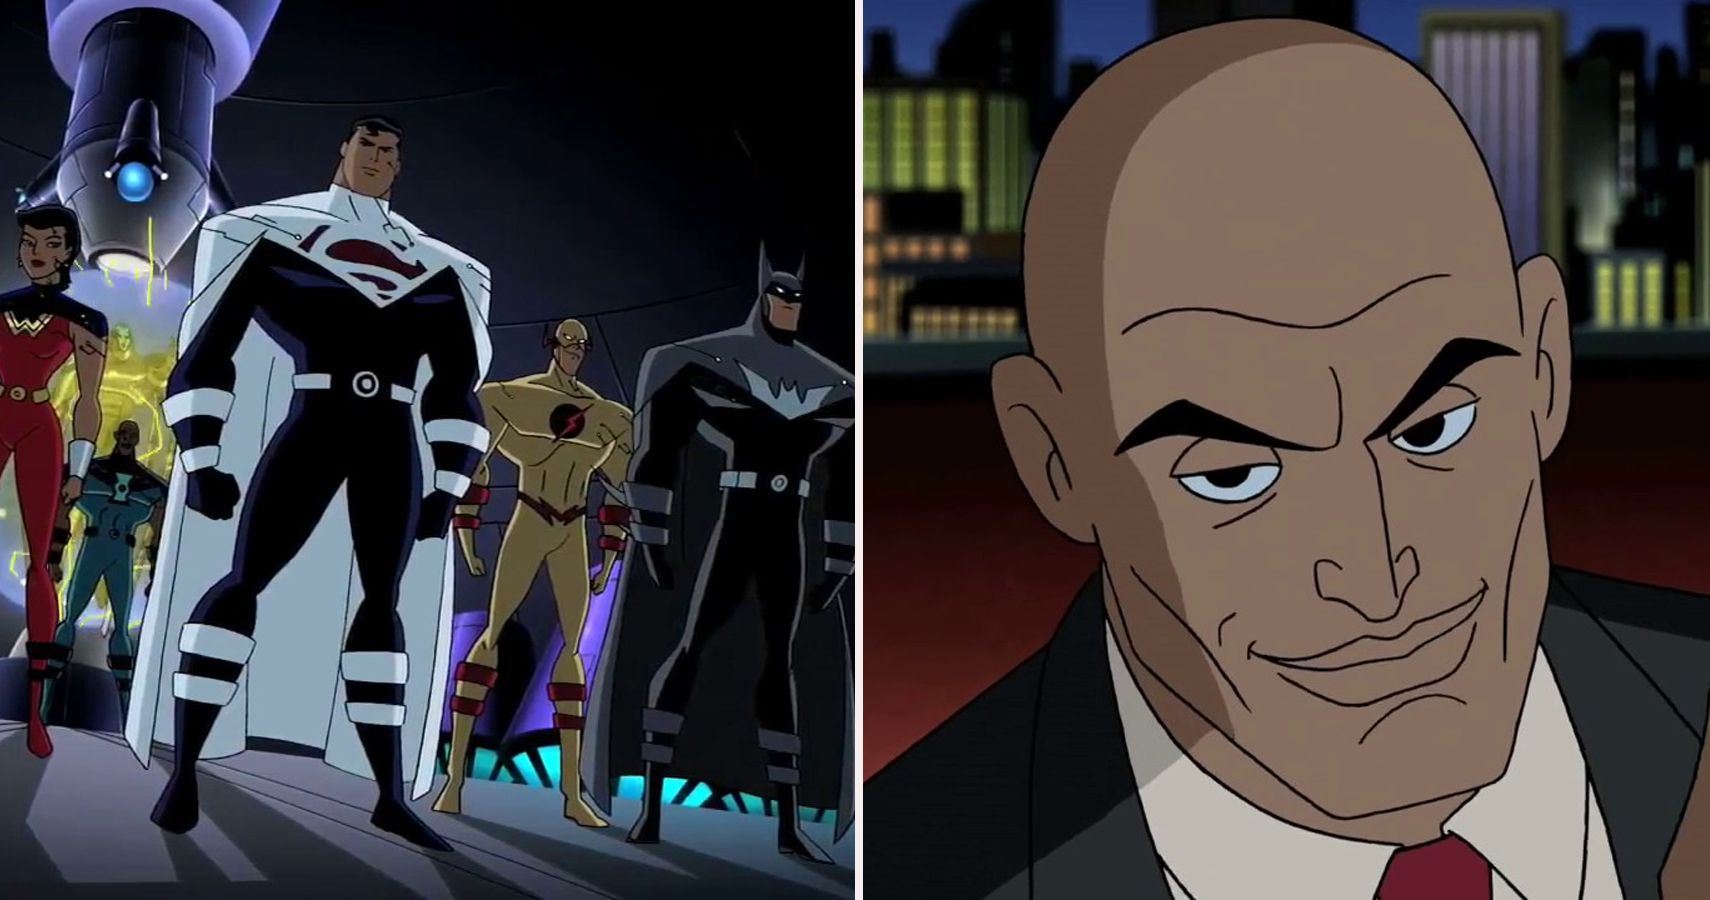 10 Best Justice League: The Animated Series Villains, Ranked